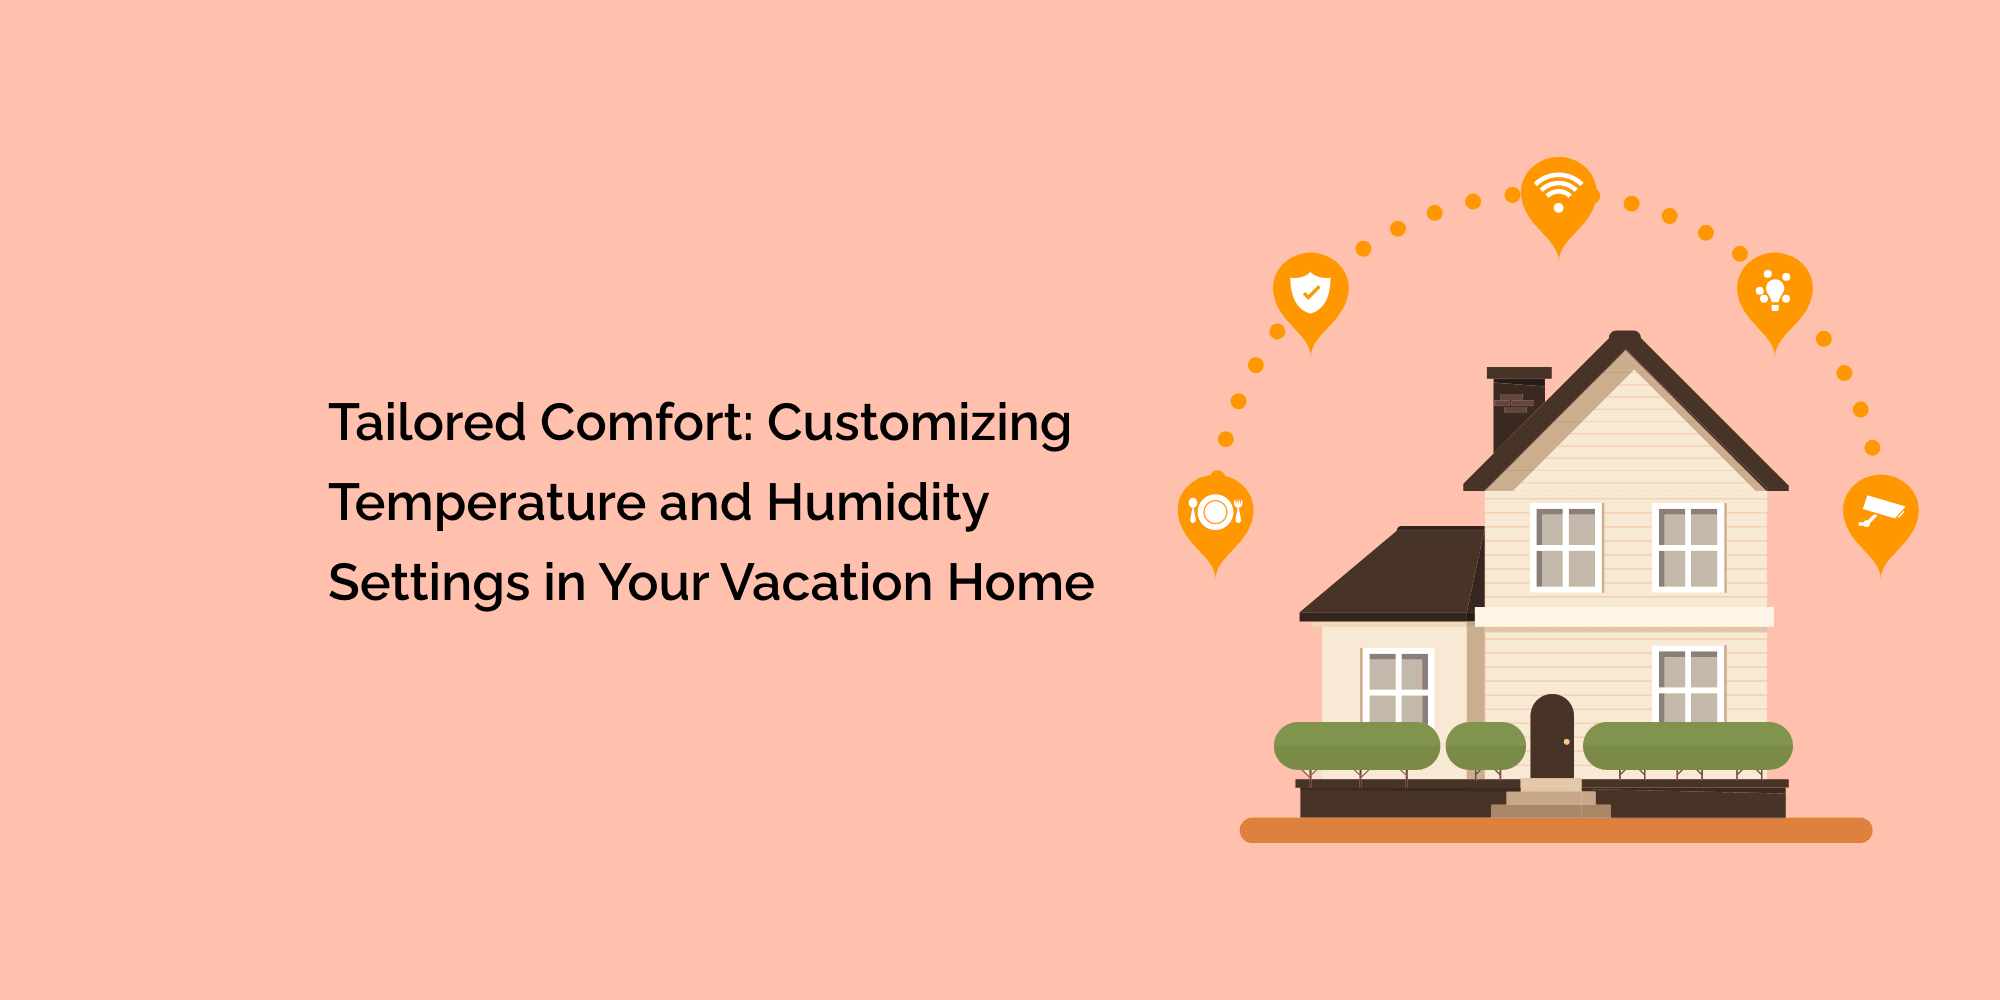 Tailored Comfort: Customizing Temperature and Humidity Settings in Your Vacation Home